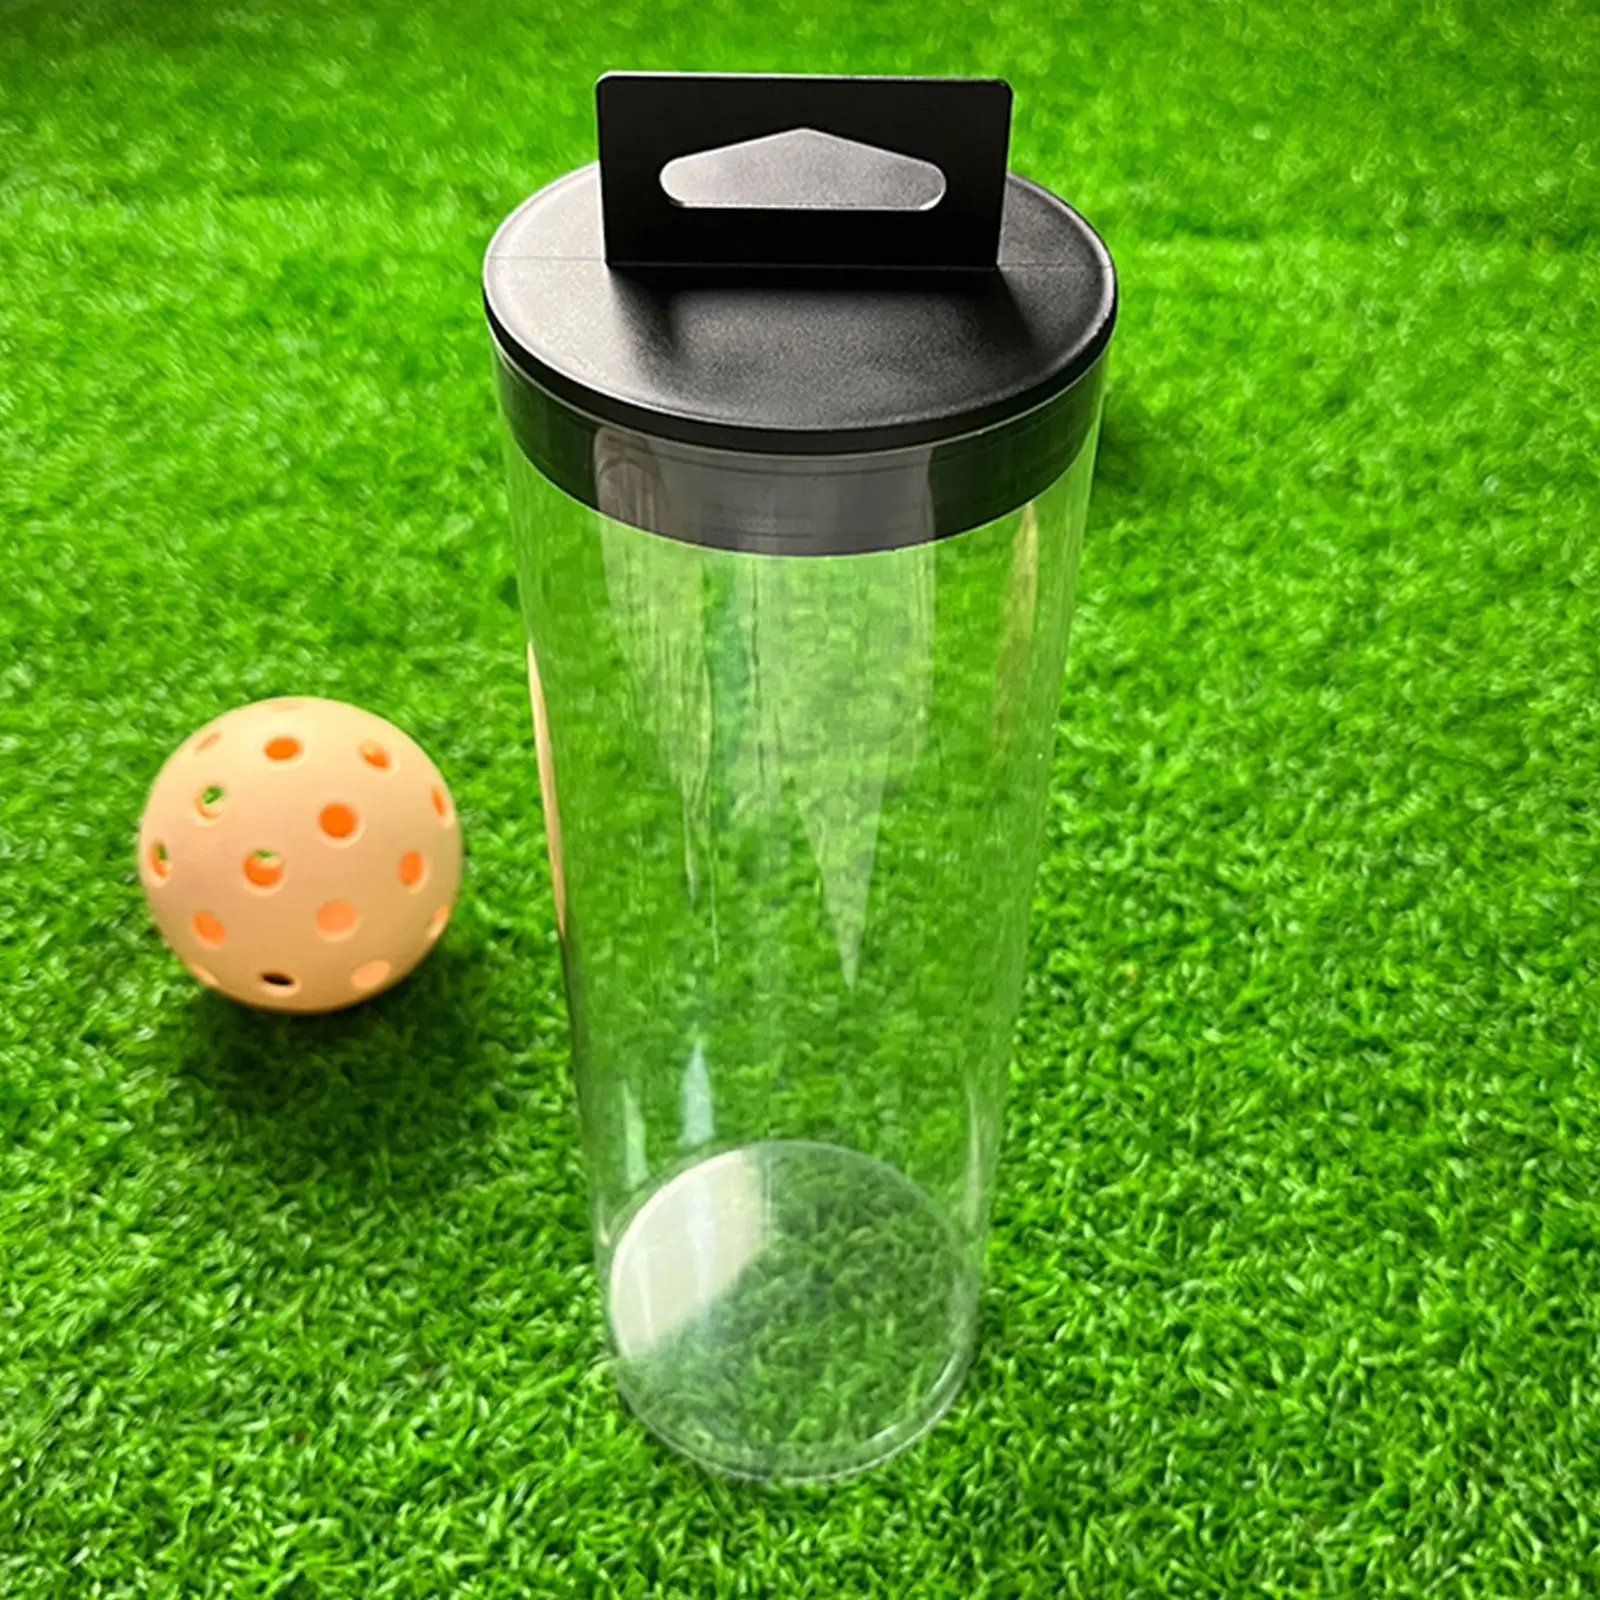 Tennis Ball Can Holder Clear Outdoor Ball Storage for Golf Training Practice